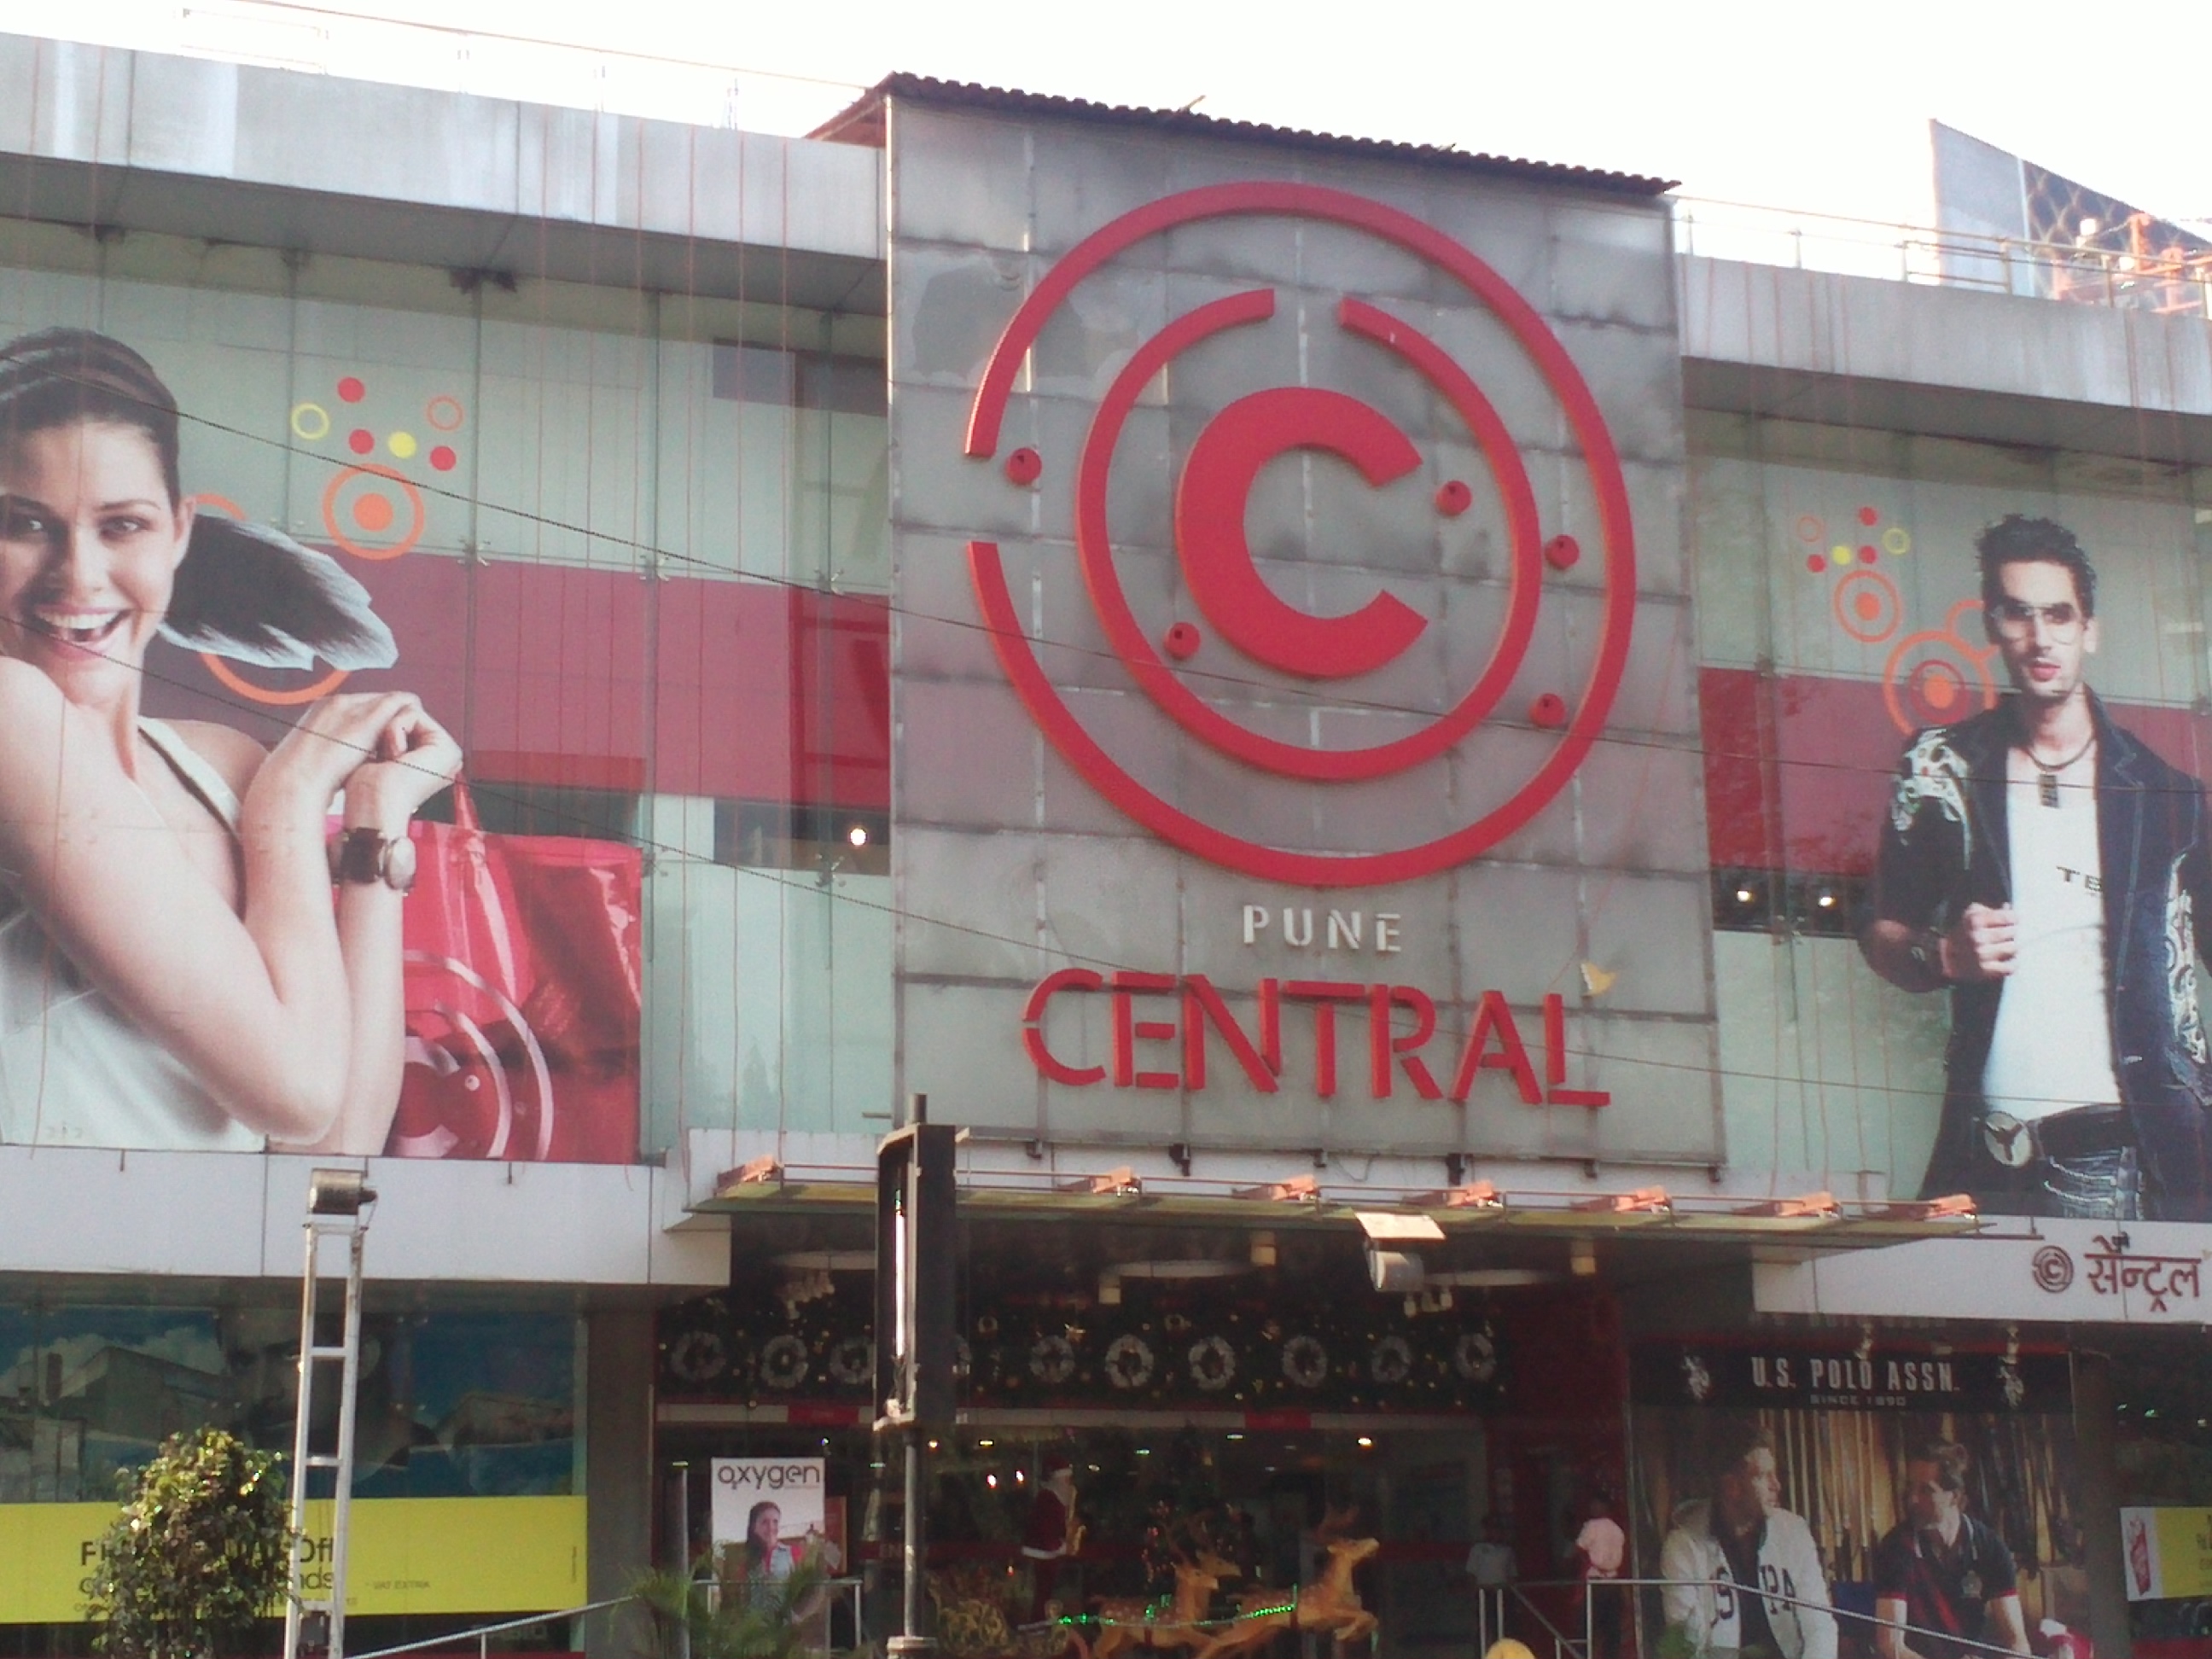 Central (Department Store) - Wikipedia